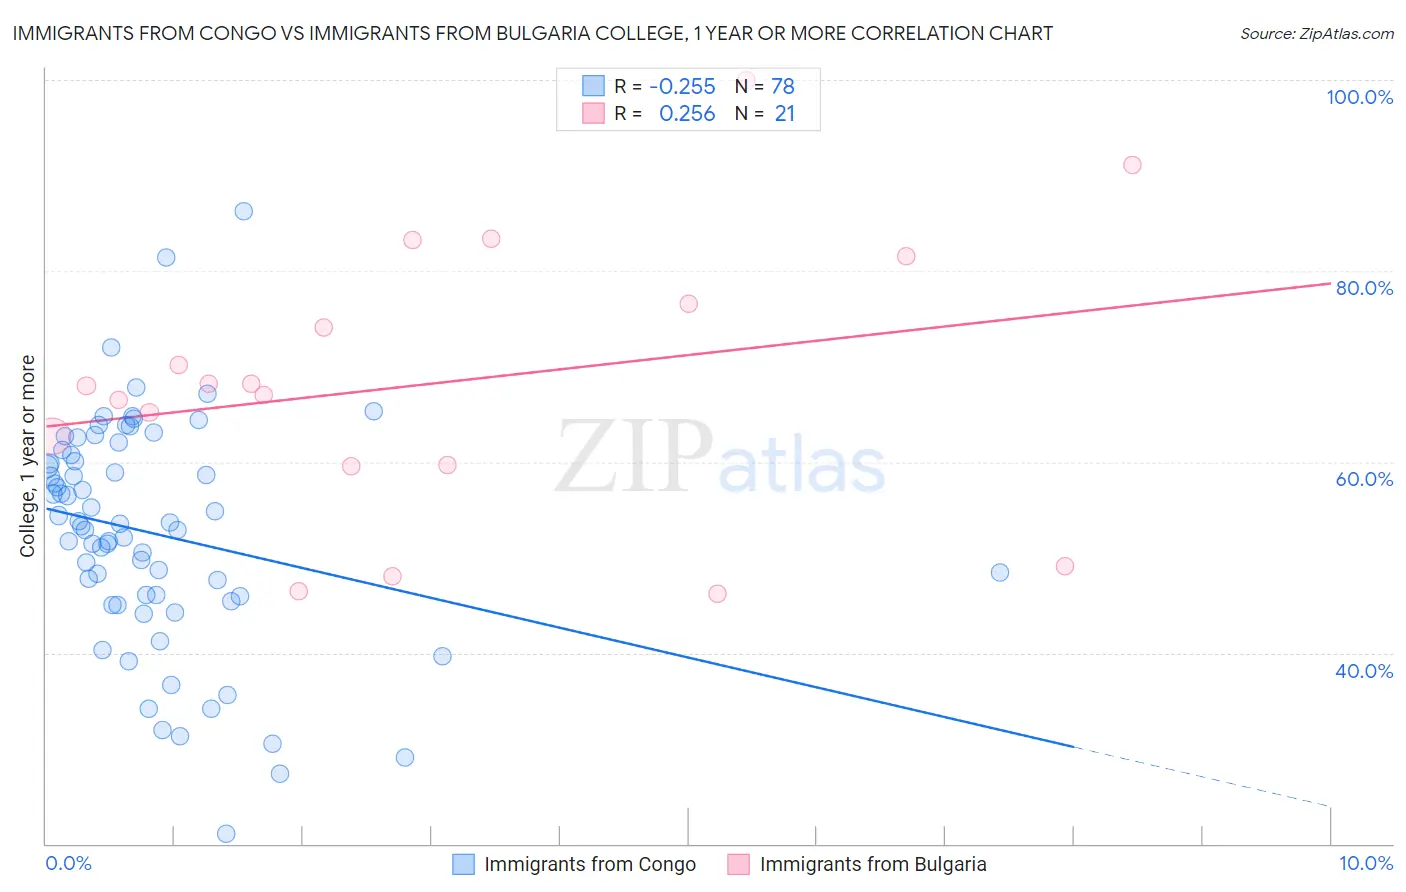 Immigrants from Congo vs Immigrants from Bulgaria College, 1 year or more